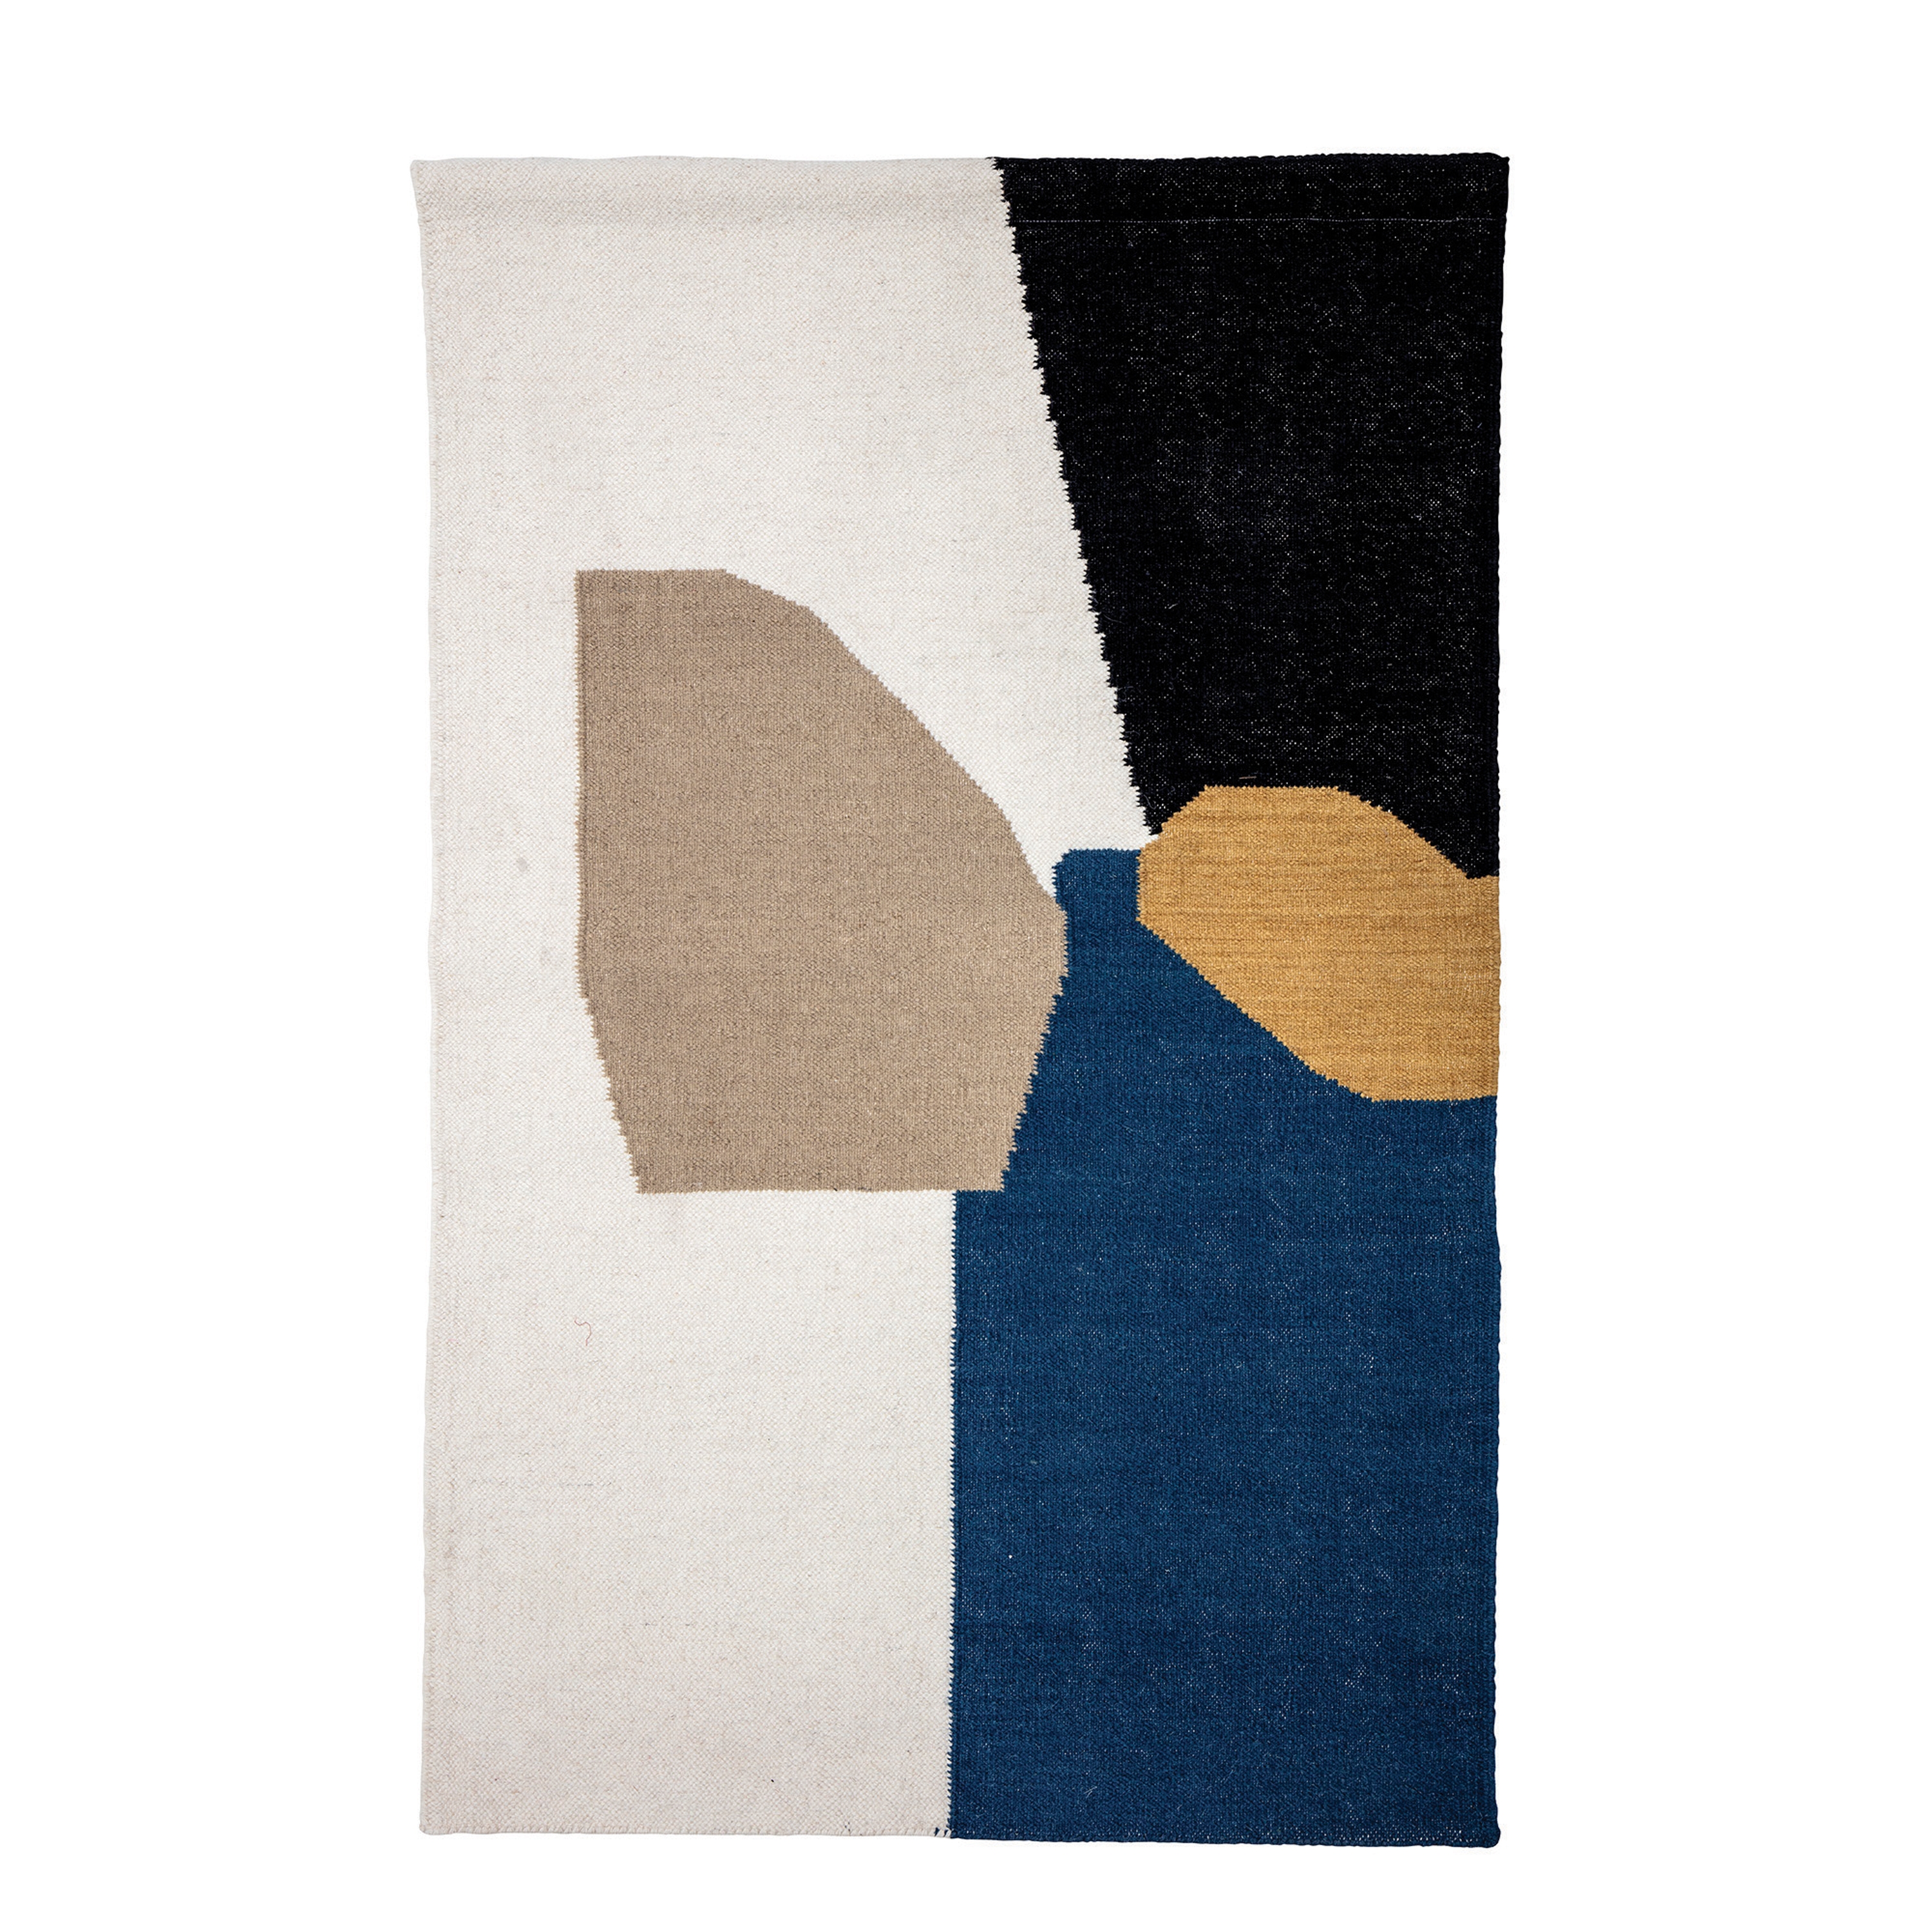 Abstract 56"H Wool & Cotton Blend Woven Wall Hanging with 2 Metal Sawtooth Hangers - Image 0